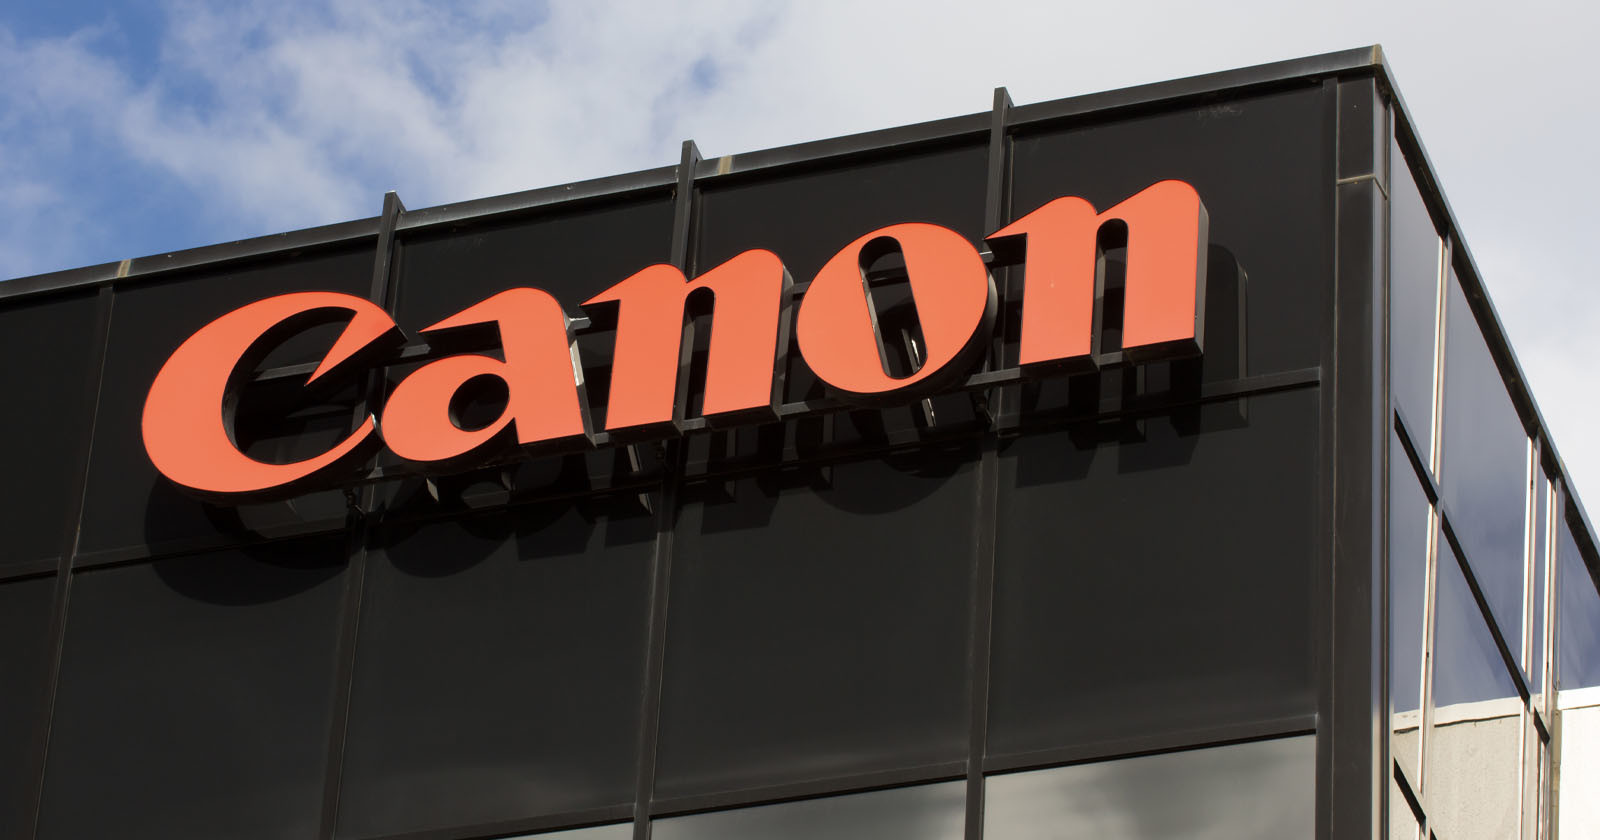  canon says camera market has largely bottomed 